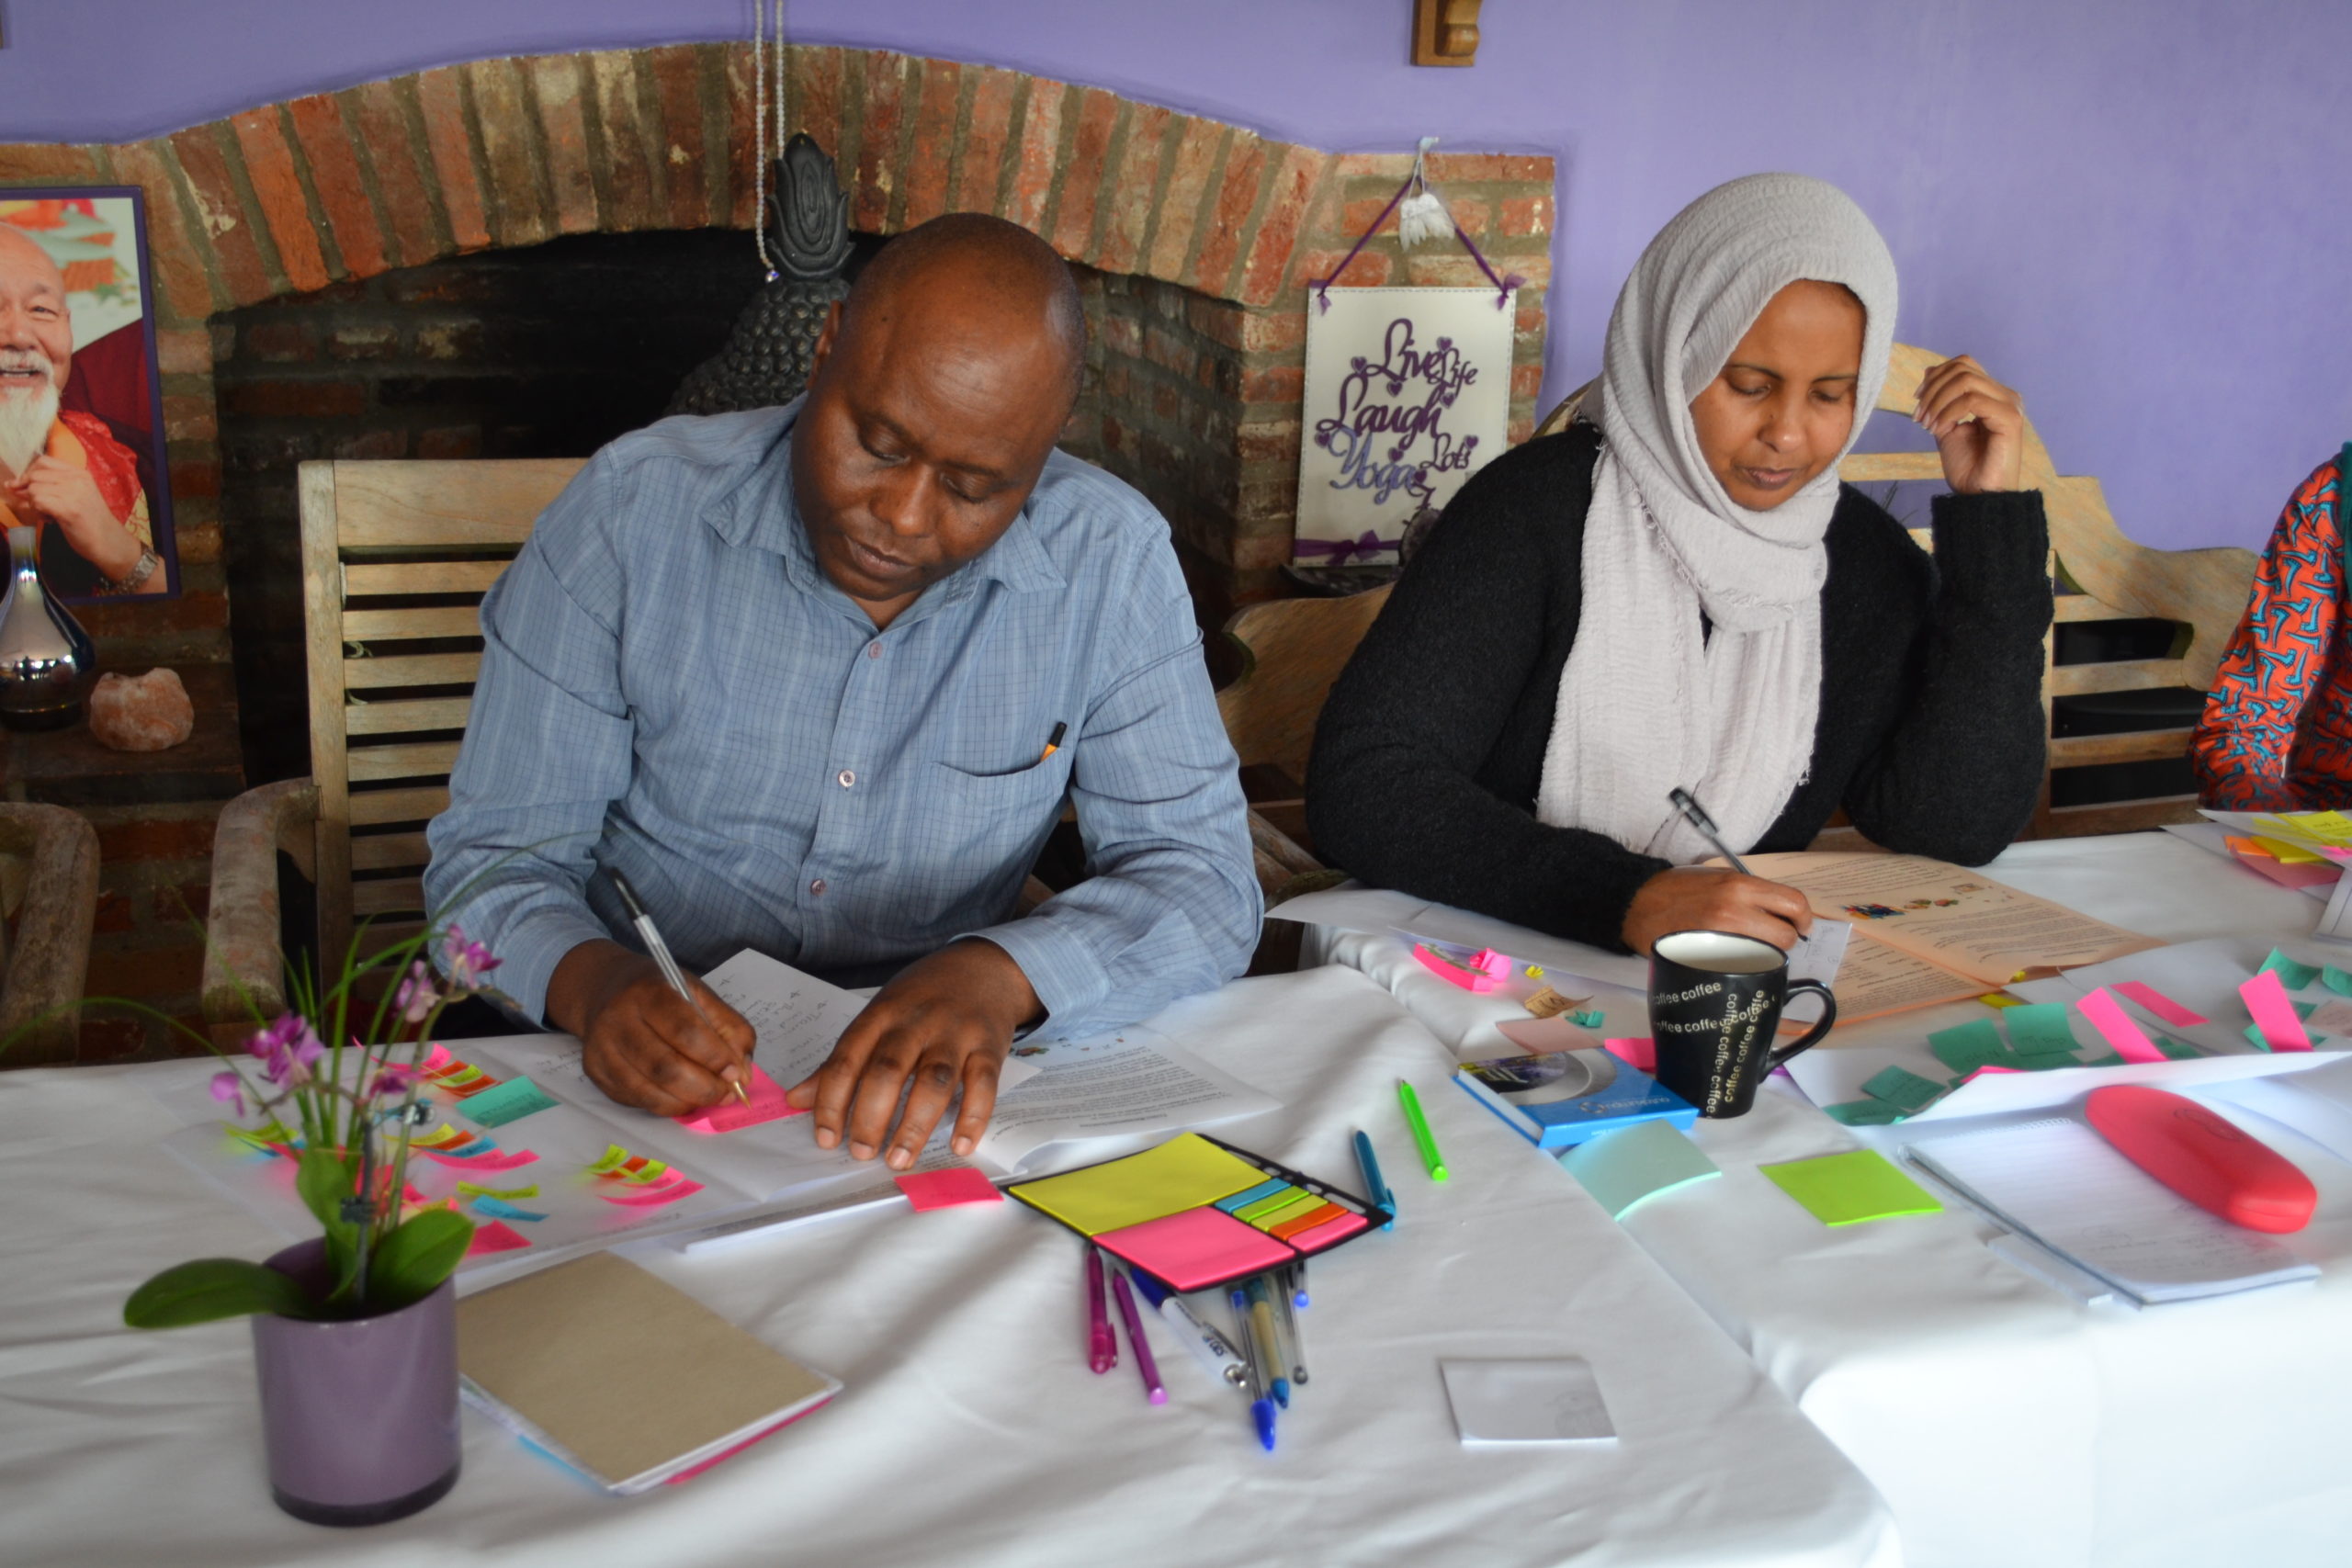 IofC UK provide learning solutions for Refugees that enable personal growth